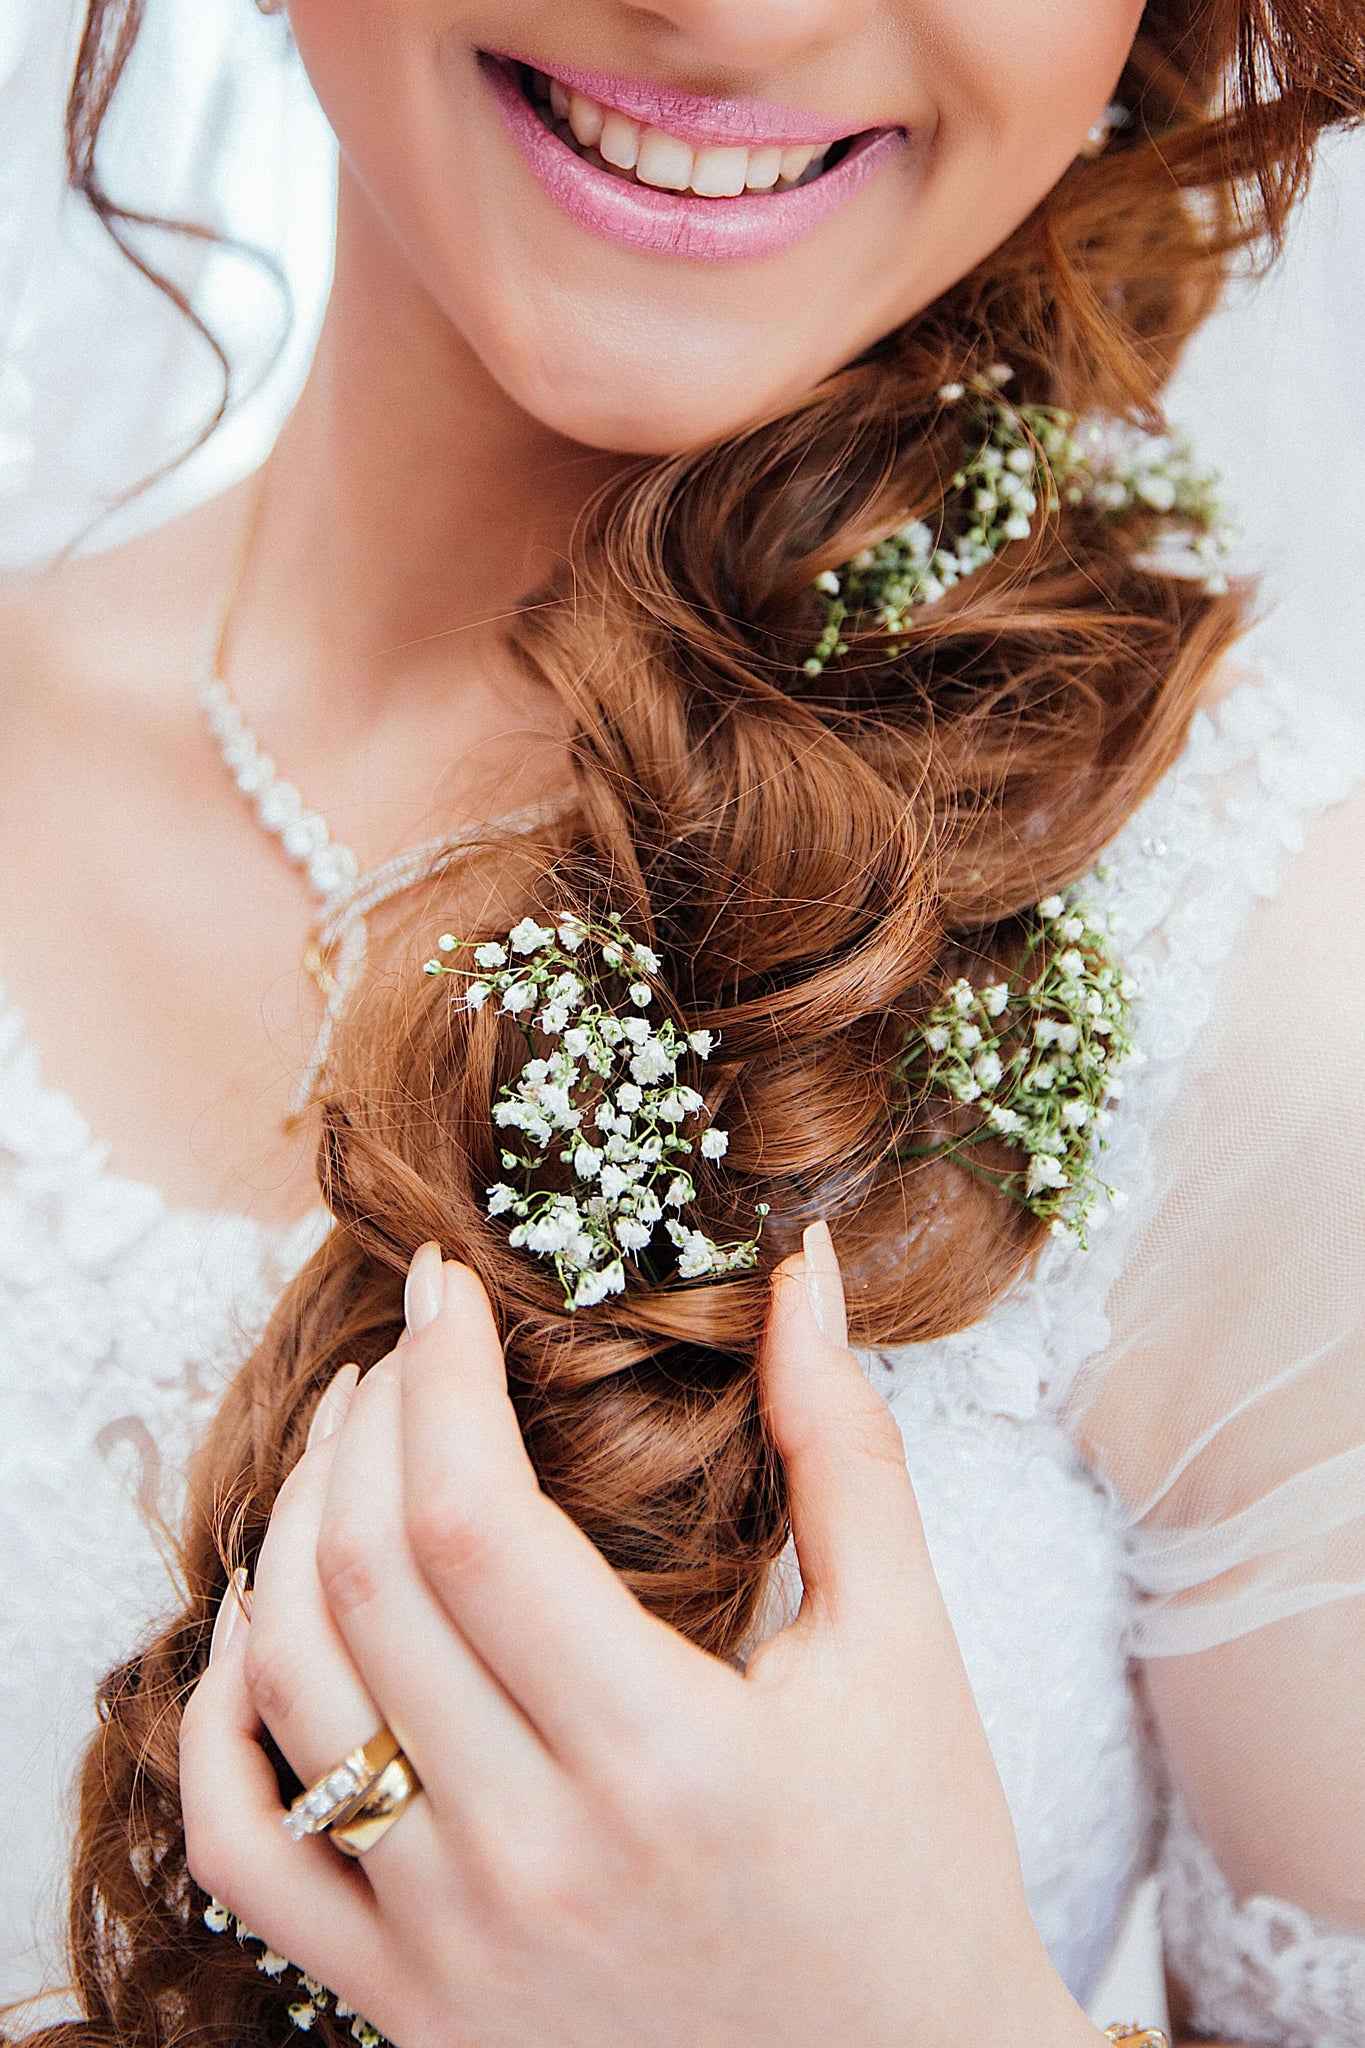 A close-up of a bride's hairstyle, showcasing a cascading side braid interwoven with clusters of tiny white flowers.